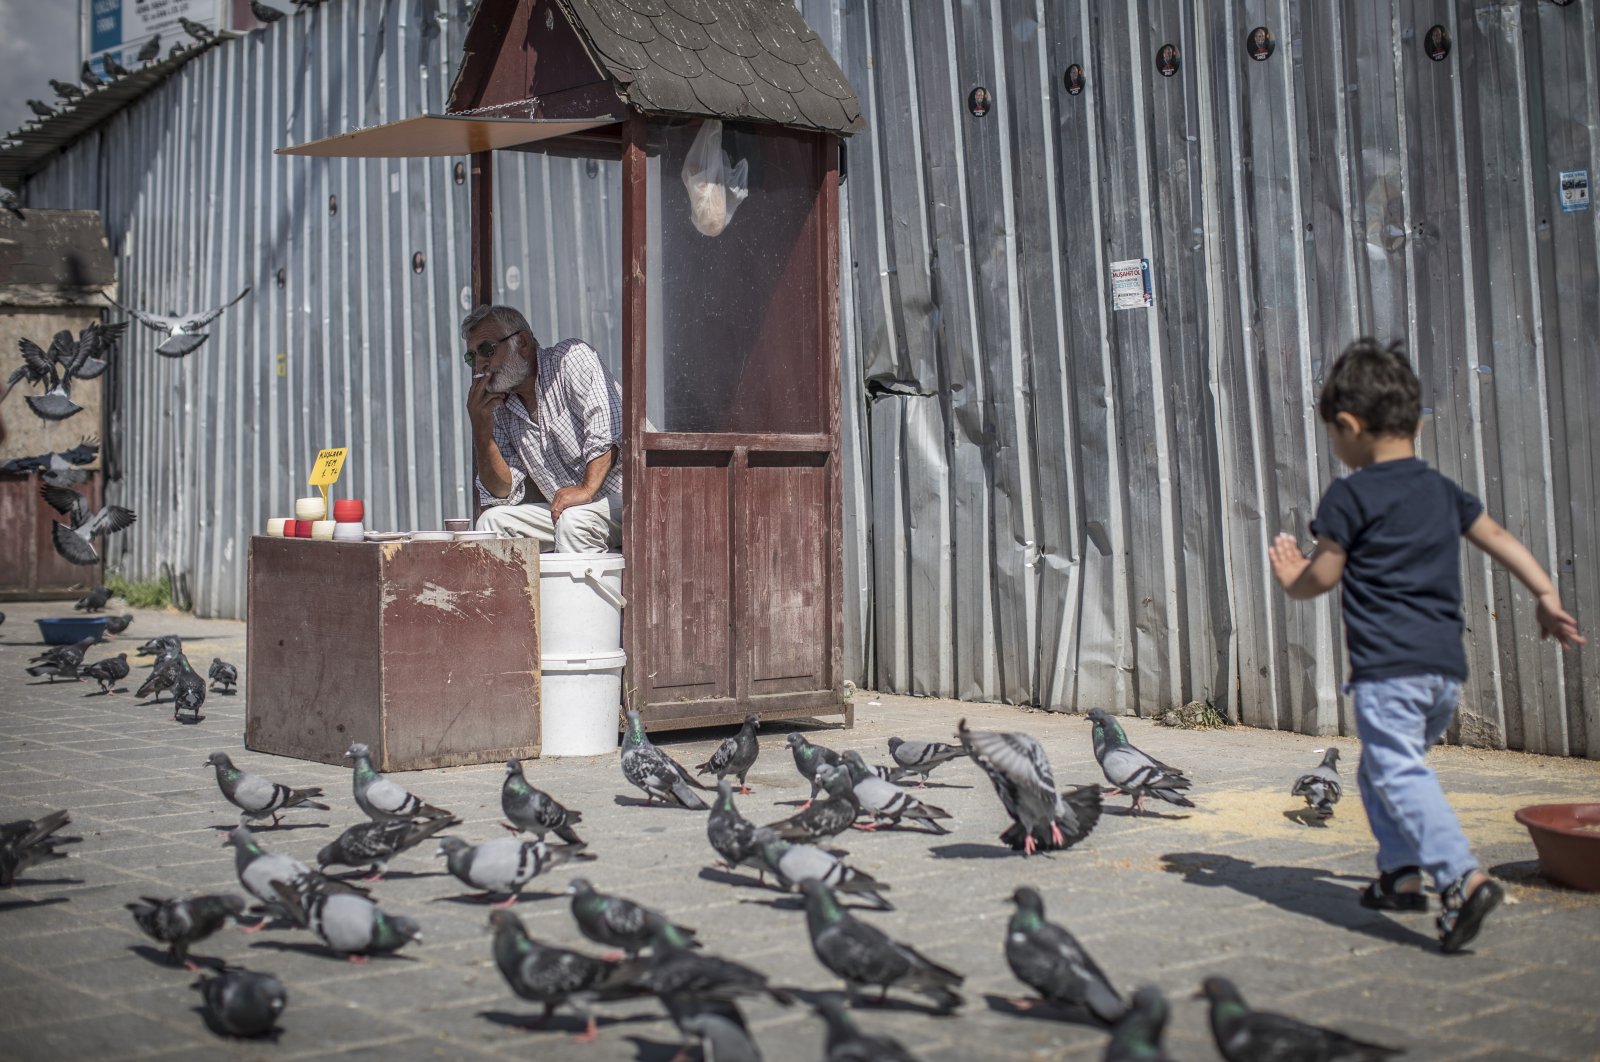 A vendor selling bird food smokes a cigarette as a boy chases pigeons in Istanbul, Turkey, 20 June 2018. (Getty Images)